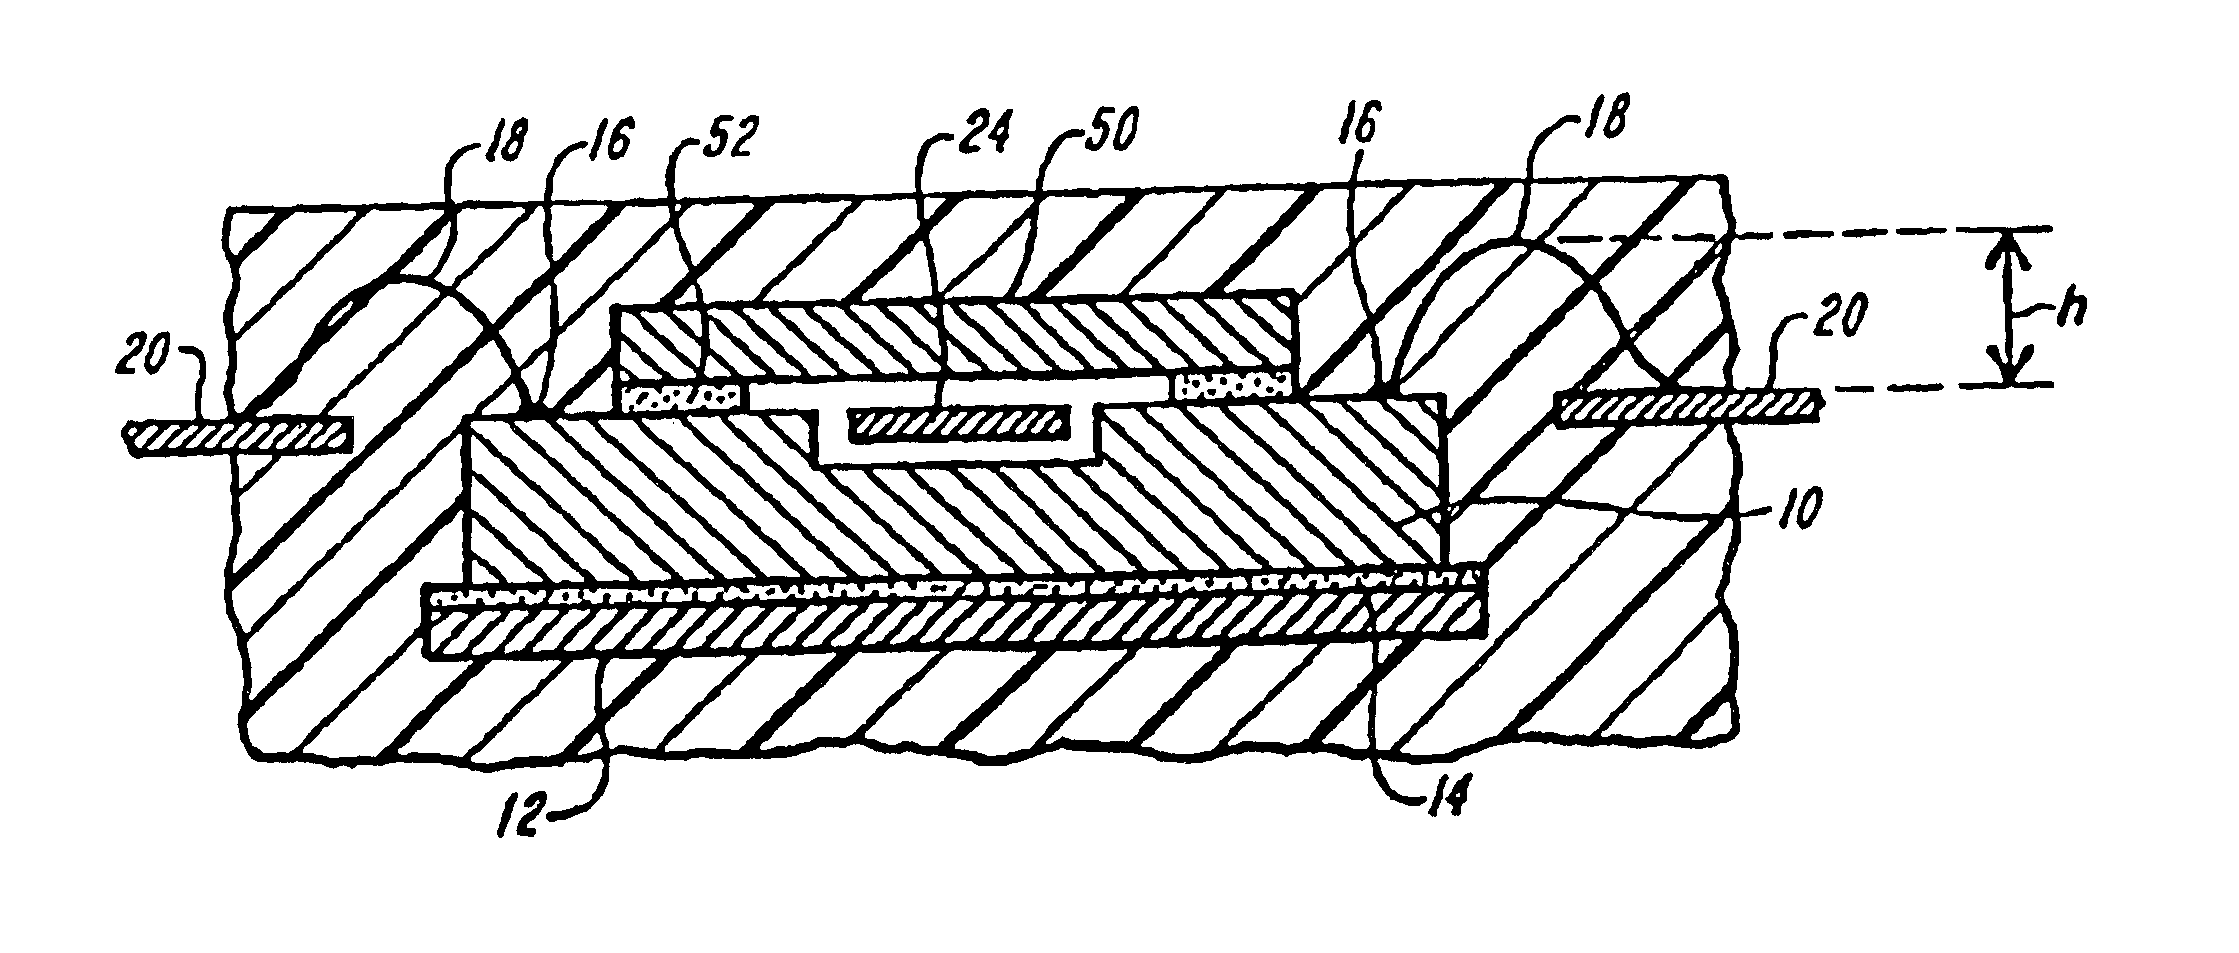 Package for sealing an integrated circuit die